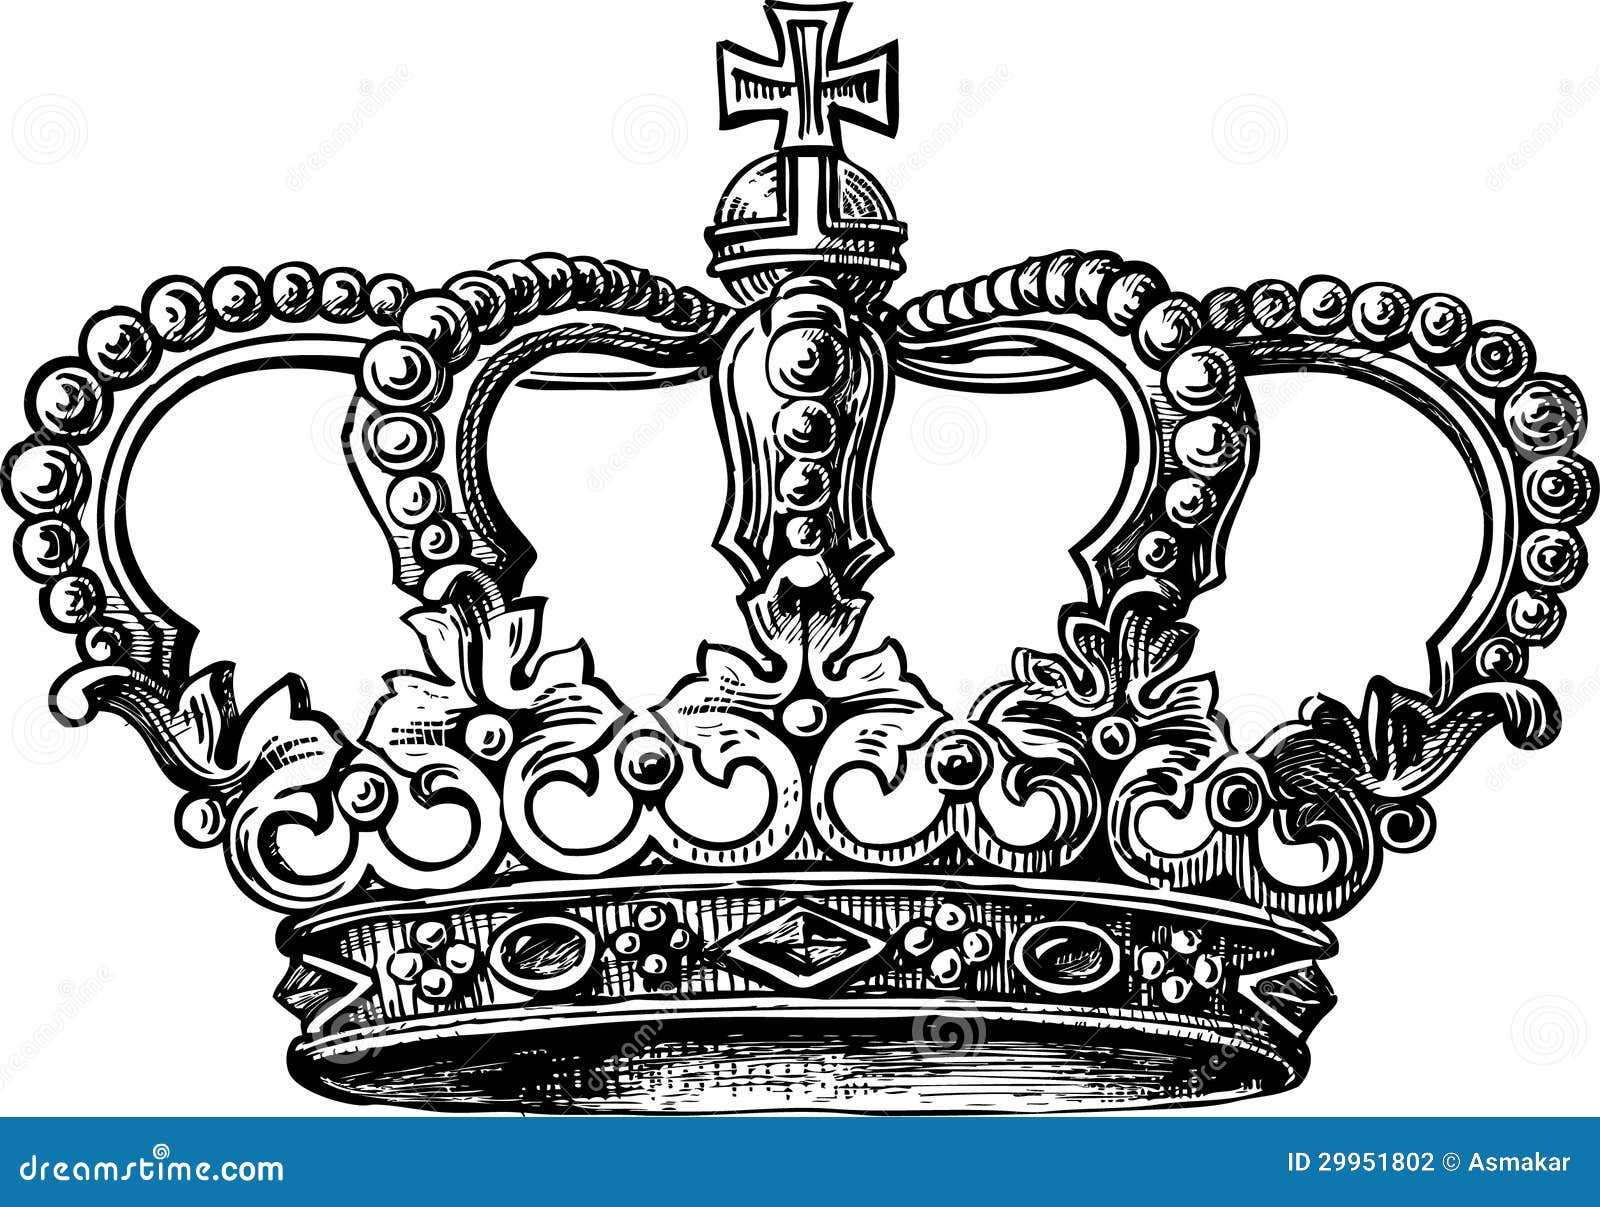 Crown Stock Photography - Image: 29951802